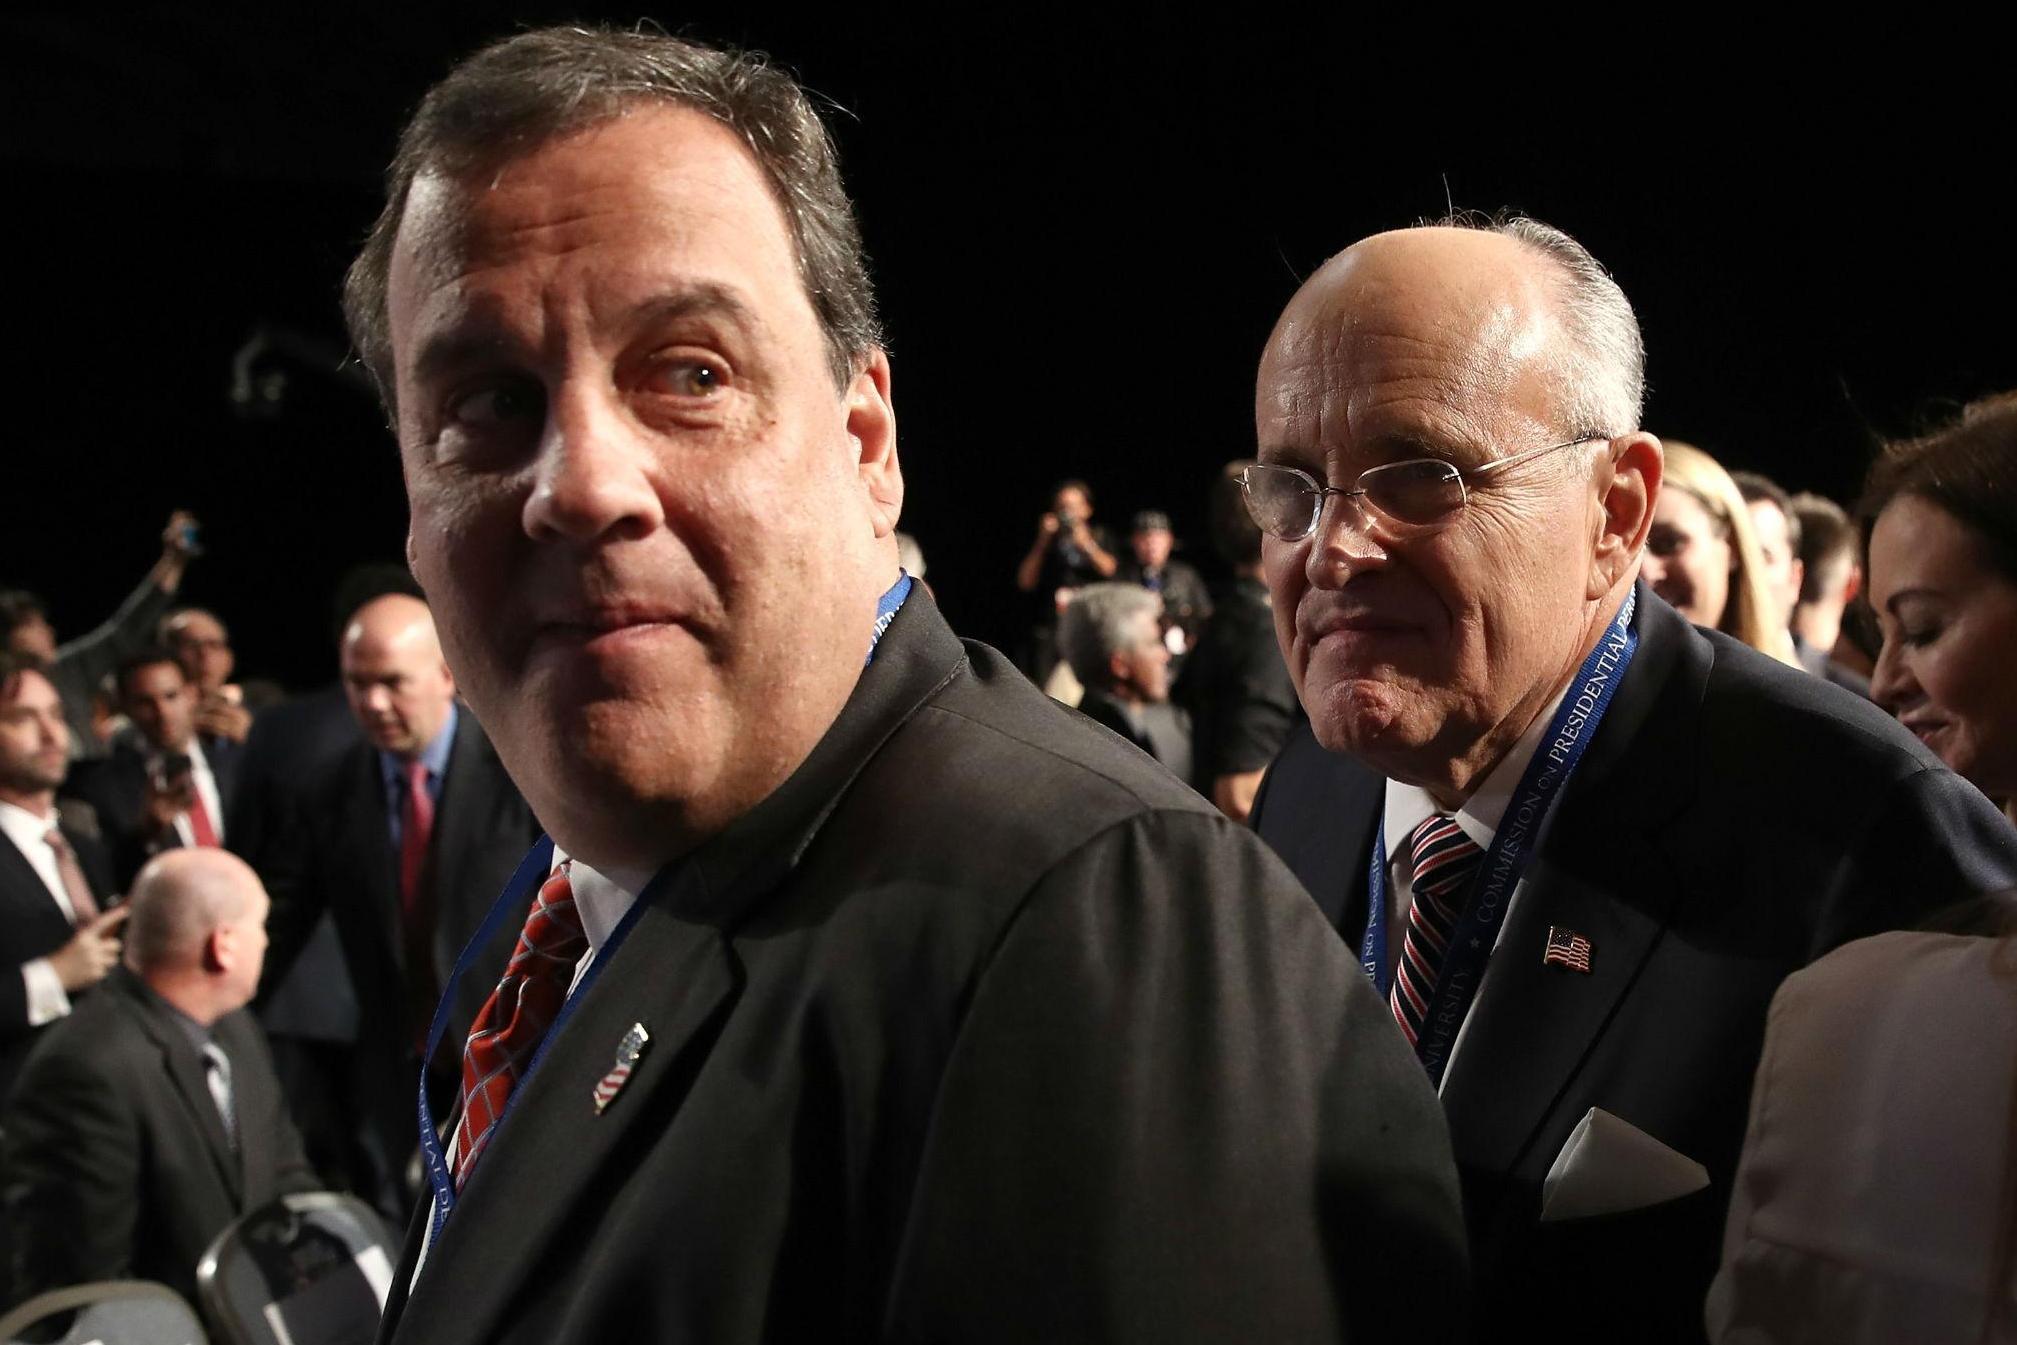 Chris Christie and Rudy Giuliani together at the first 2016 presidential debate at Hofstra University last Monday